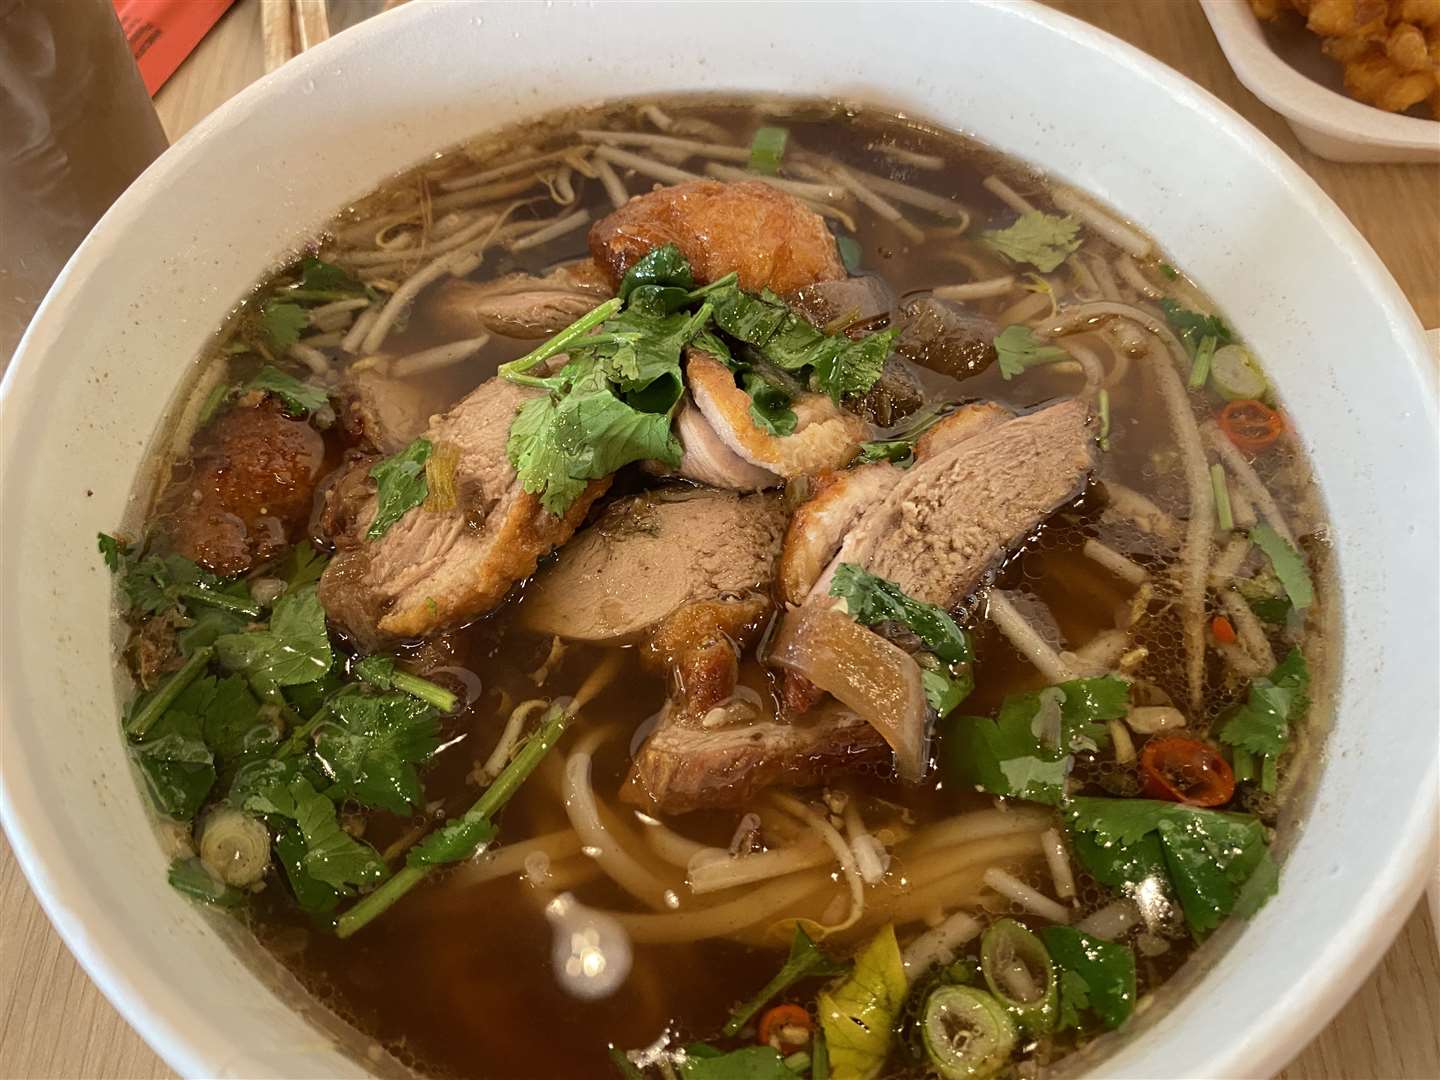 The duck noodle soup at Aroi Dee went down a treat